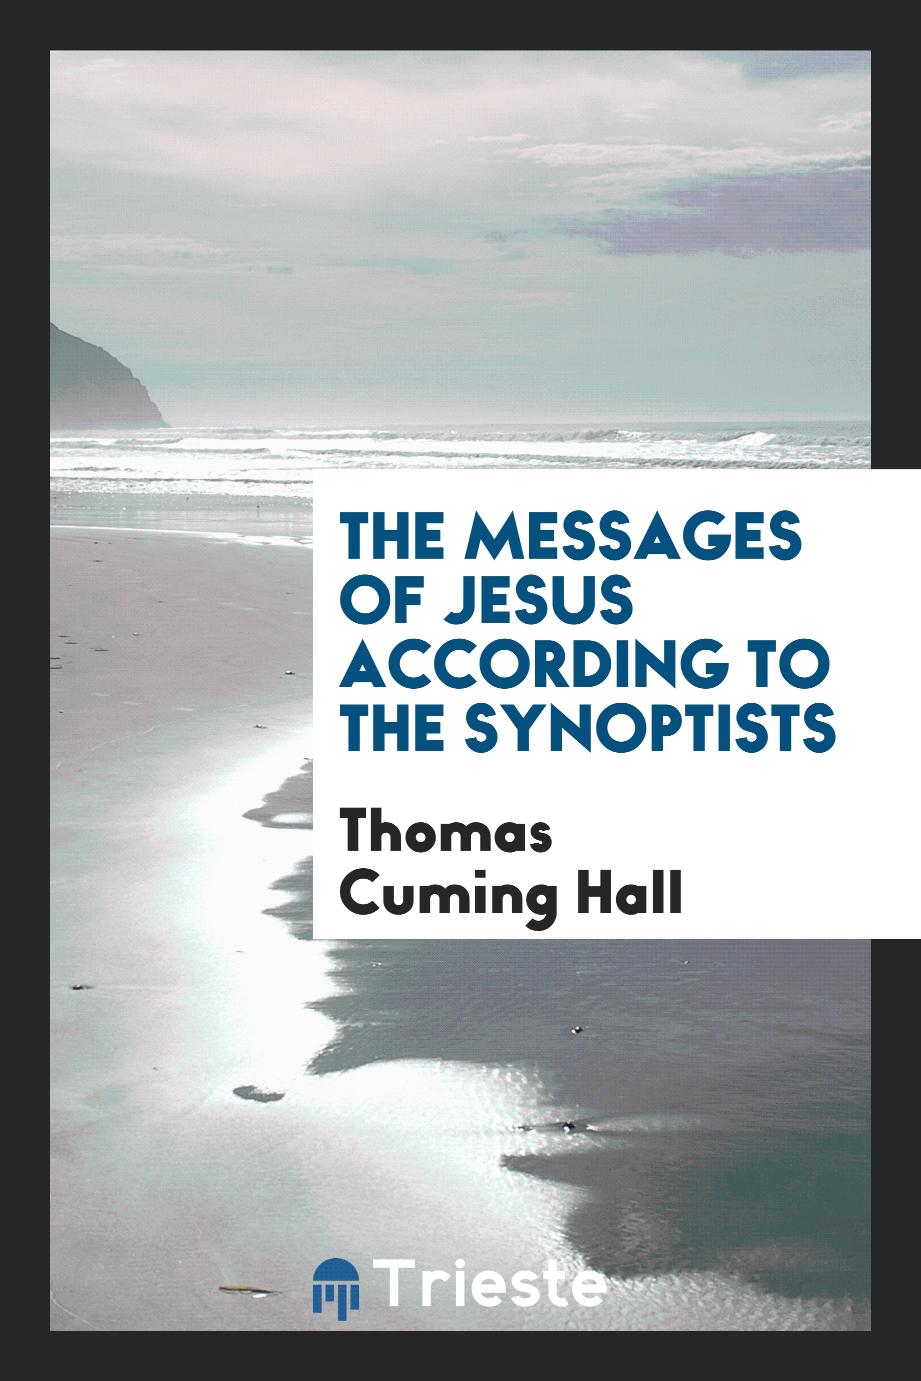 The messages of Jesus according to the synoptists